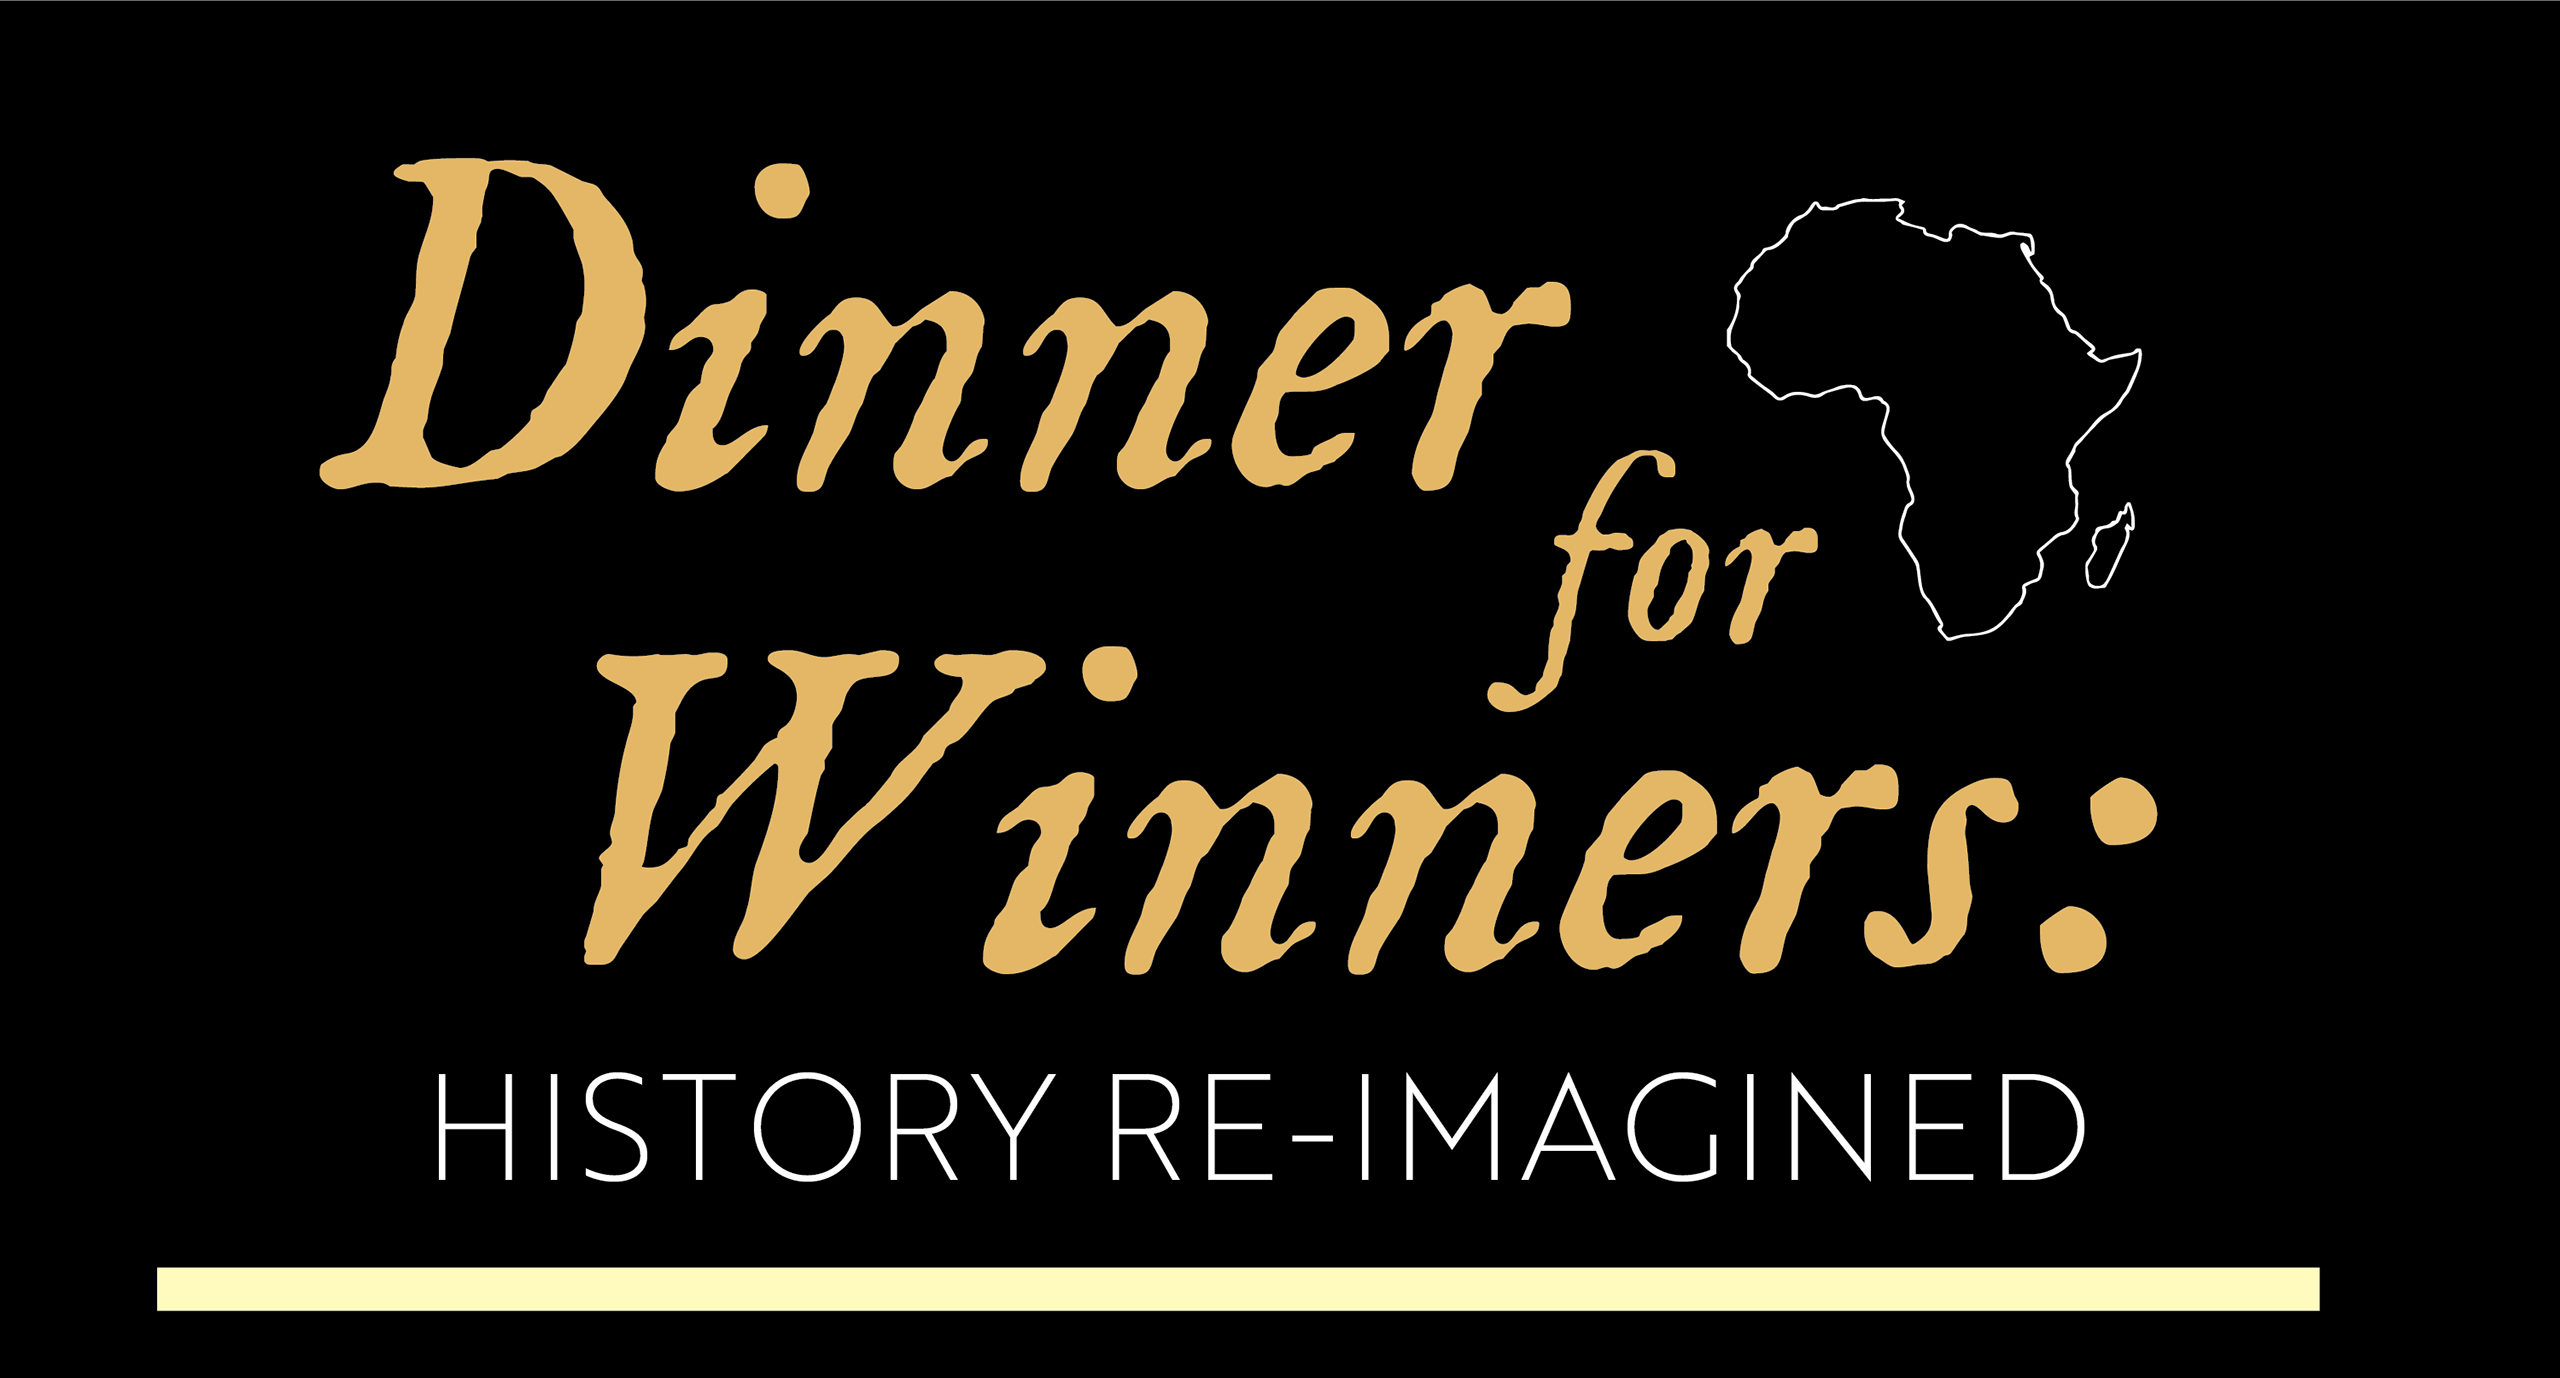 African American students sponsoring "Dinner for Winners" celebration for Black History Month